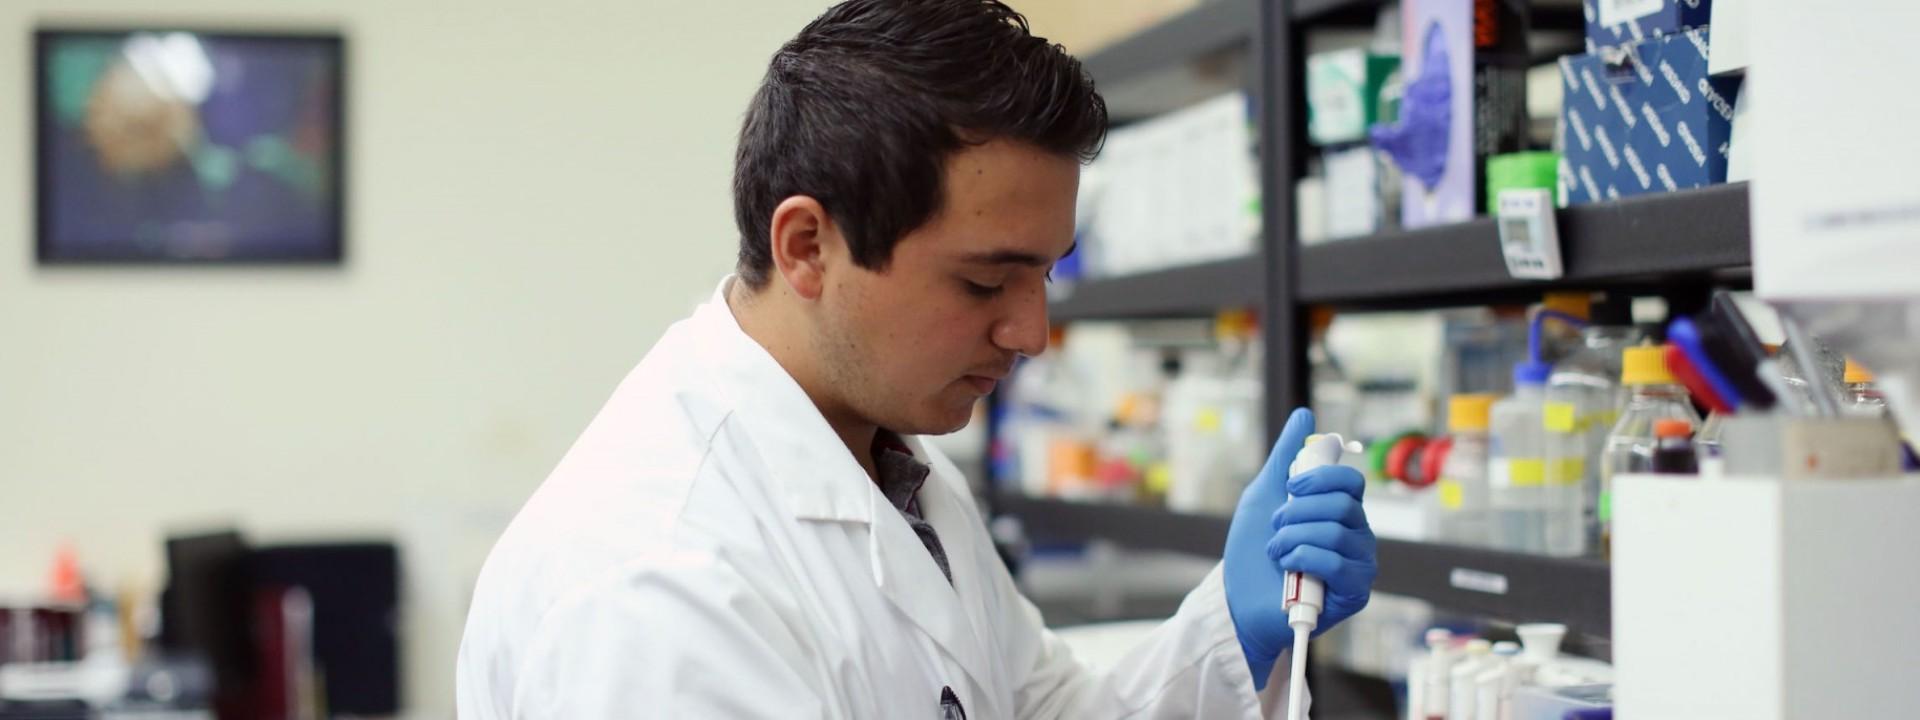 Image of the side profile of a student in a while lab coat and blue gloves using a lab instrument. 